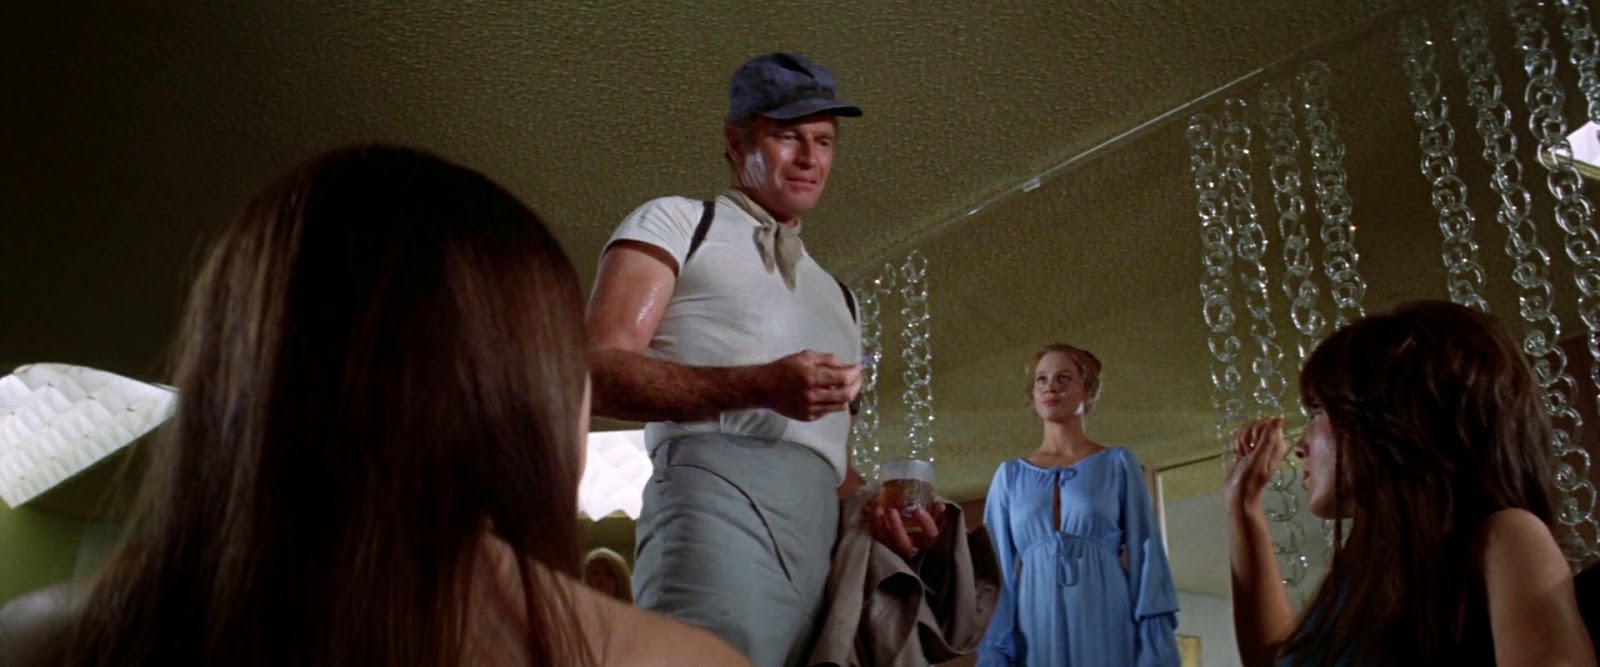 Charlton Heston + Leigh Taylor-Young - Soylent Green (1973) admiring the furniture 2